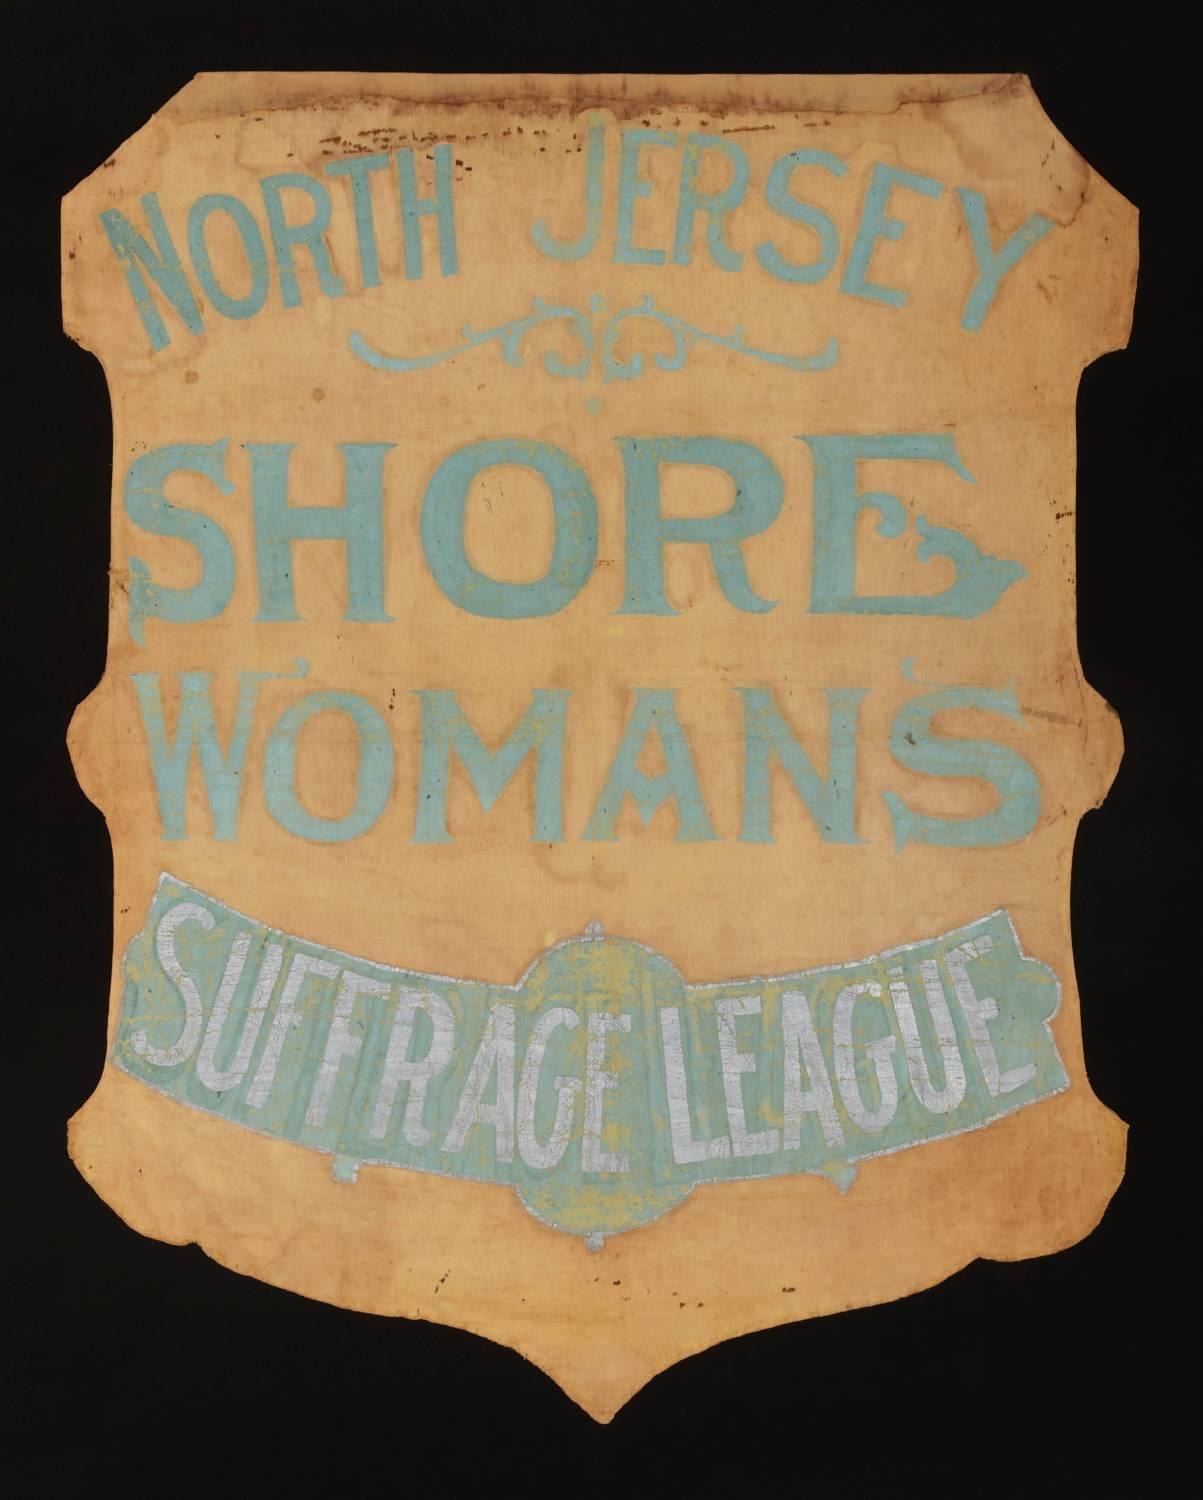 Shield-shaped banner from the North Jersey shore woman's suffrage league, handed down through the family of its president, viola aguero, with a large archive of material that includes an image of her actually holding the banner:

 During the